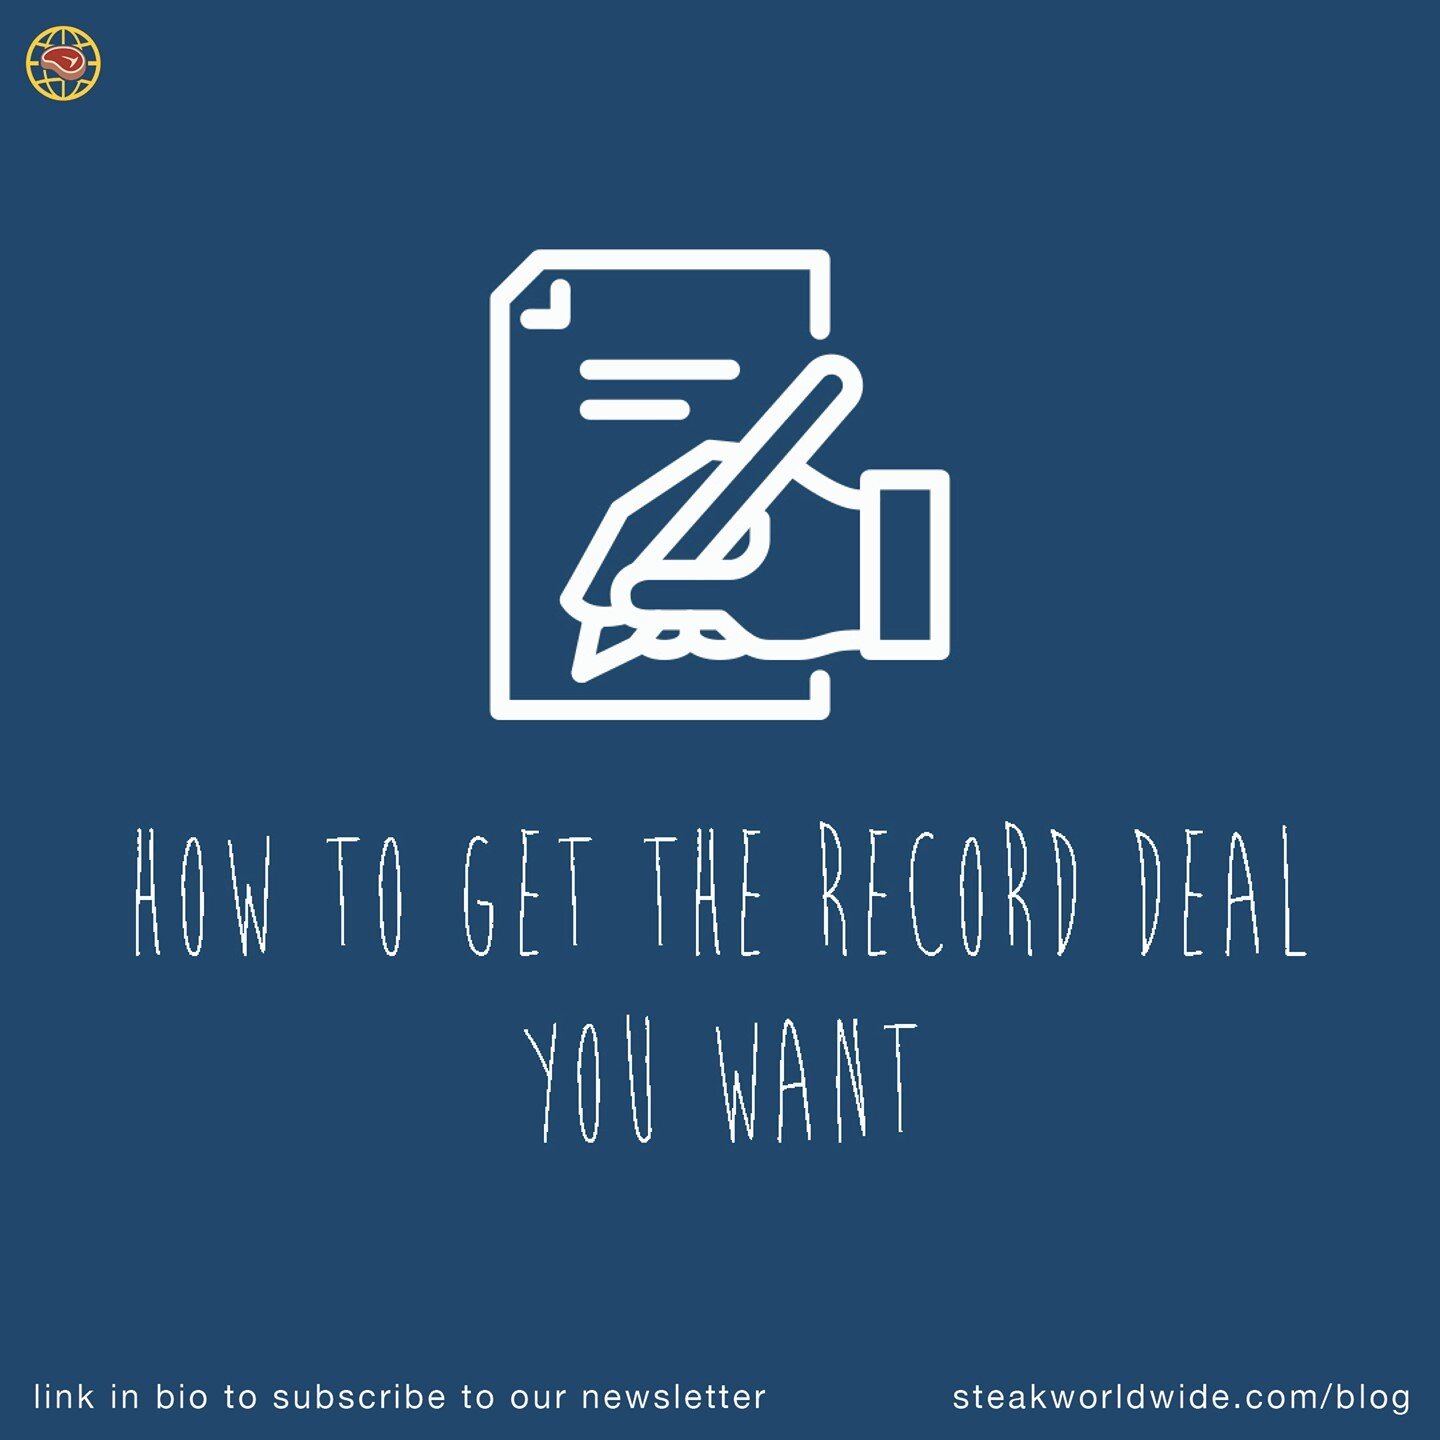 In the last few weeks, I have covered a handful of topics to explain how record deals work in the modern music industry. But let&rsquo;s say you&rsquo;ve read those articles already &amp; have decided to pursue a record deal as your long term or shor